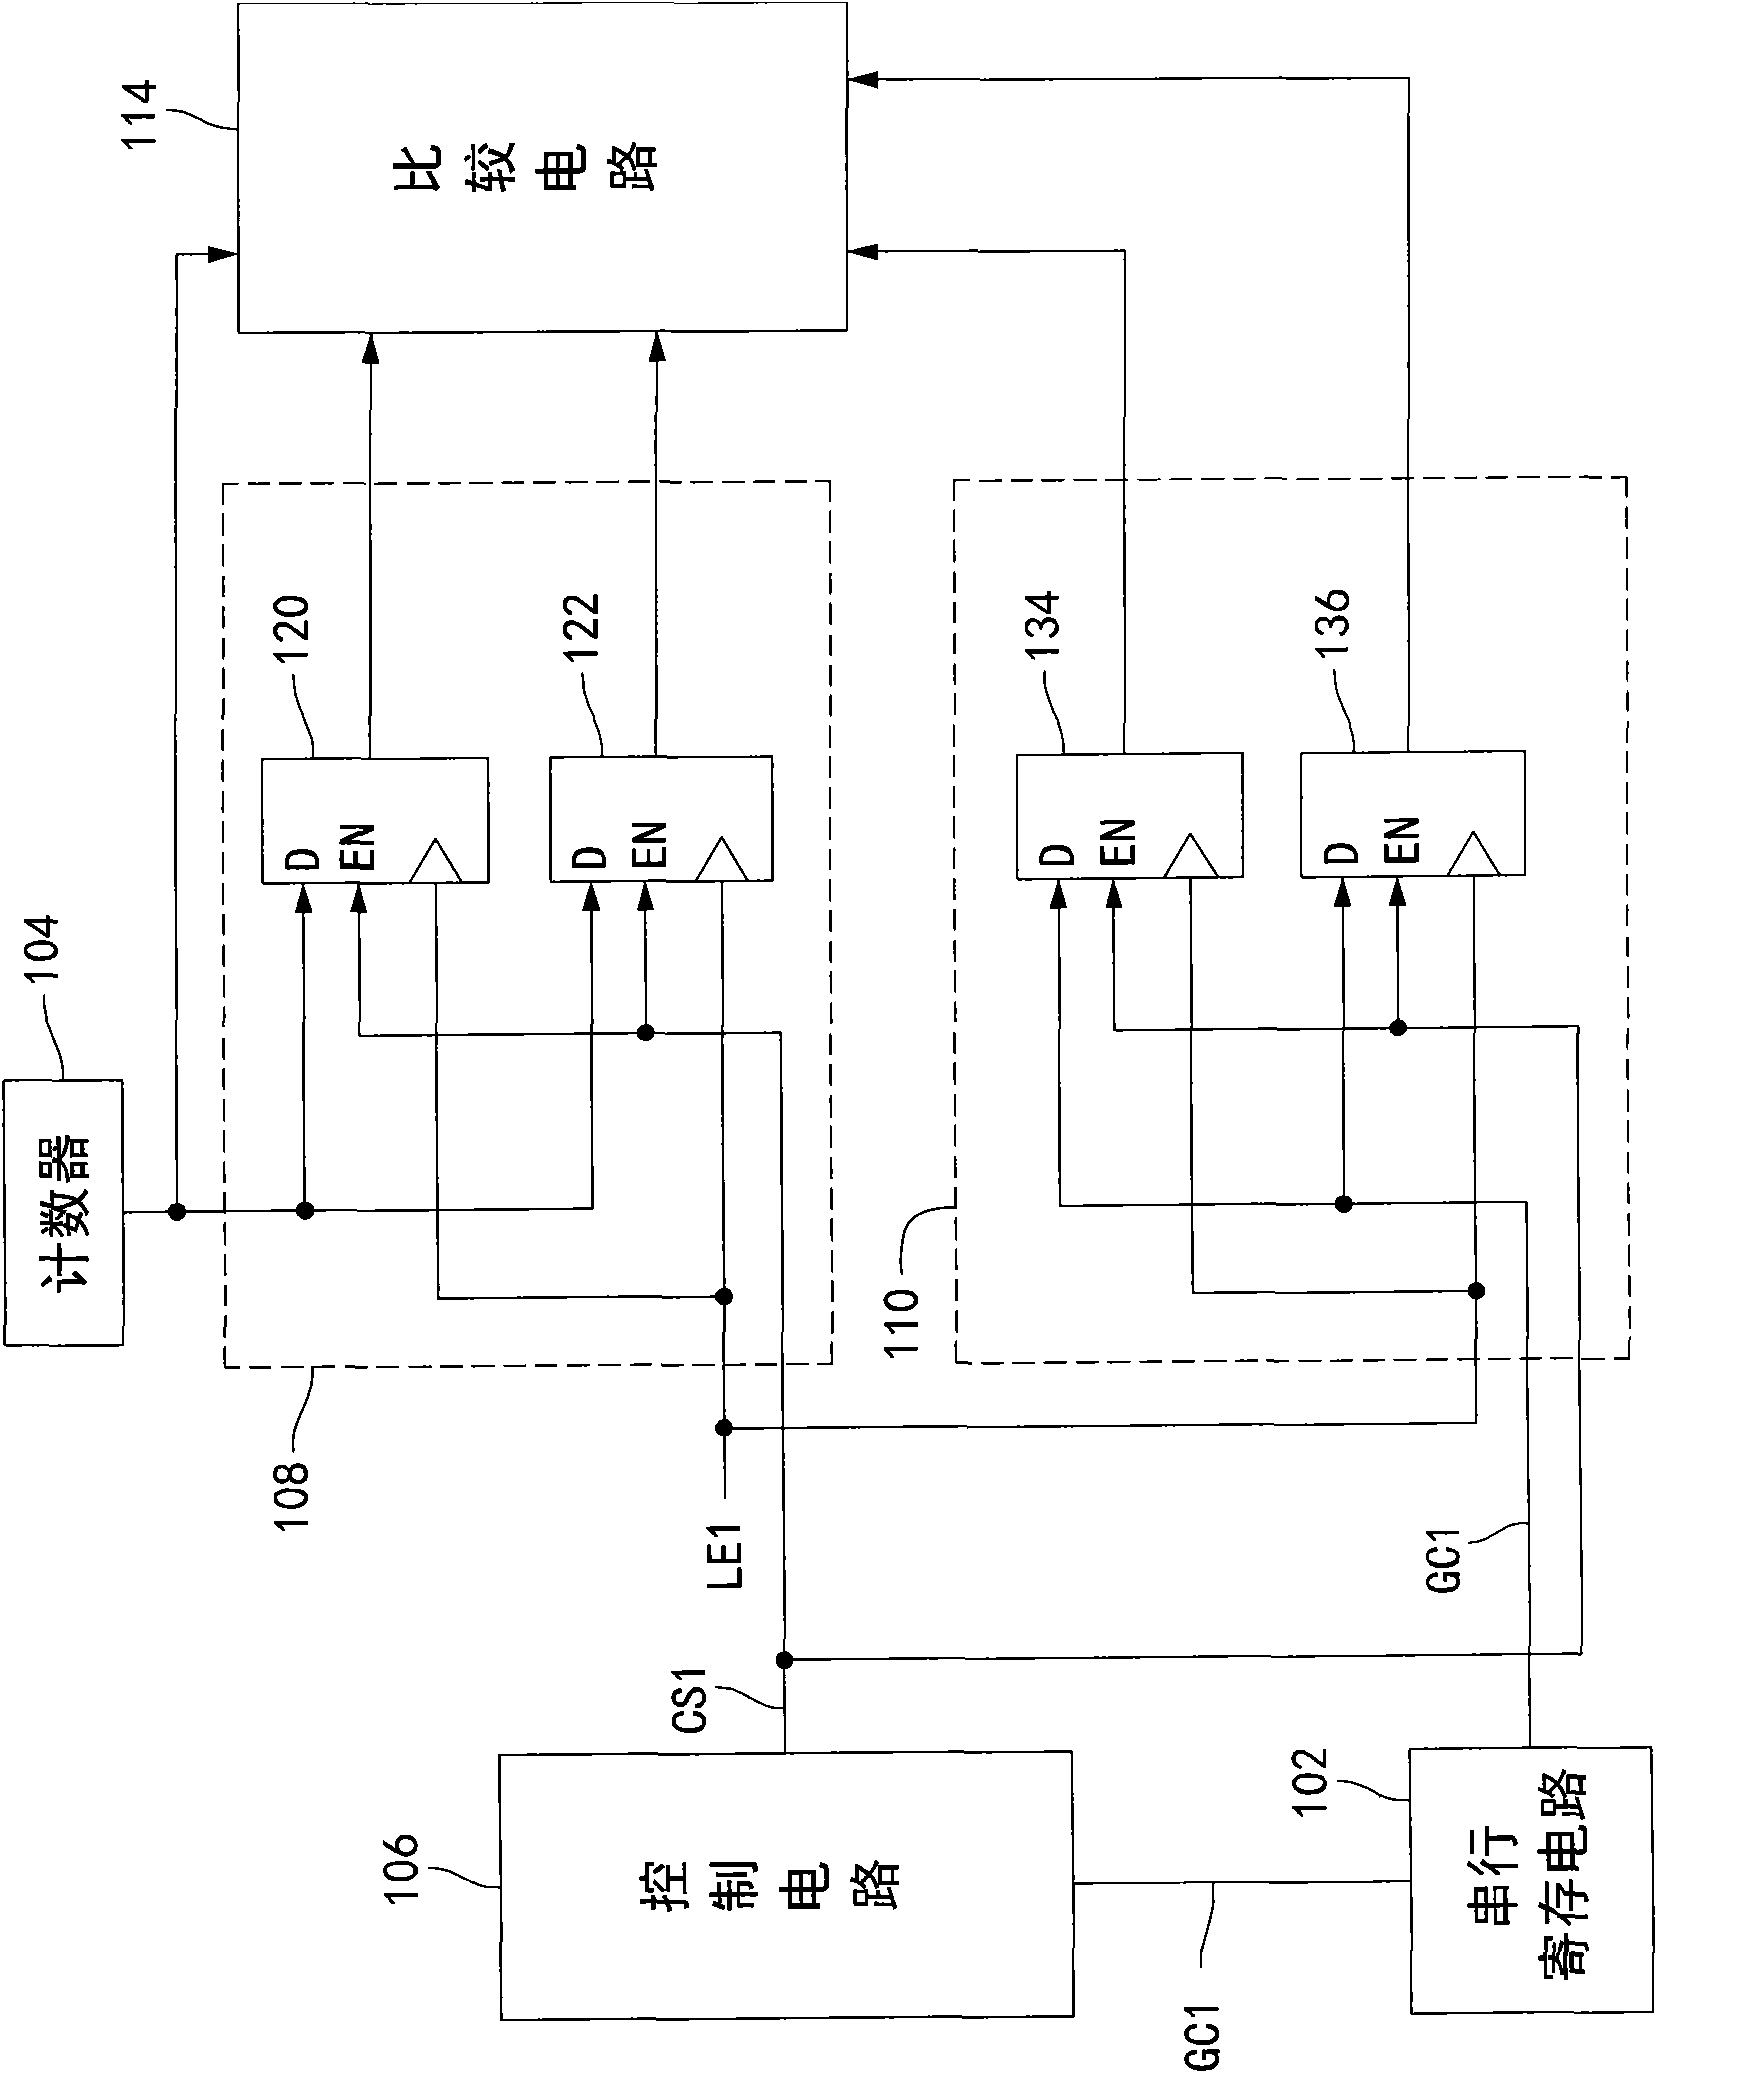 Segmented controlled drive device of light-emitting diodes (LEDs)